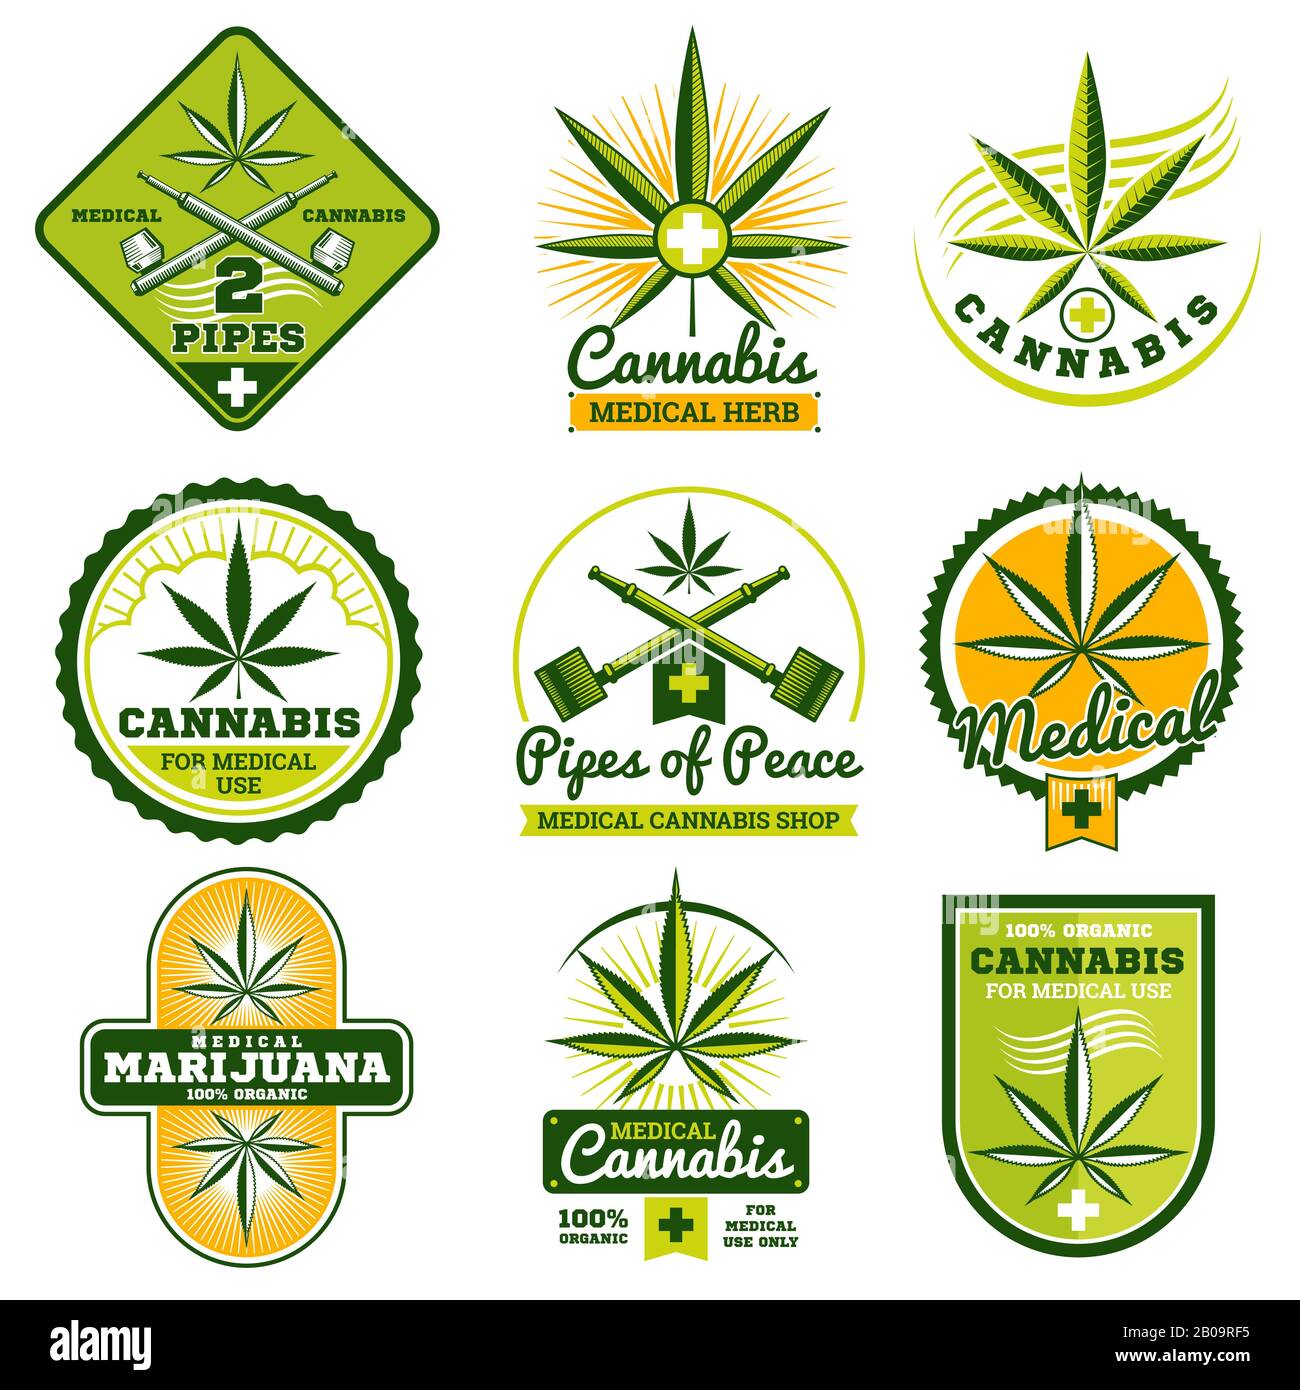 Cannabis pipe Vectors & Illustrations for Free Download